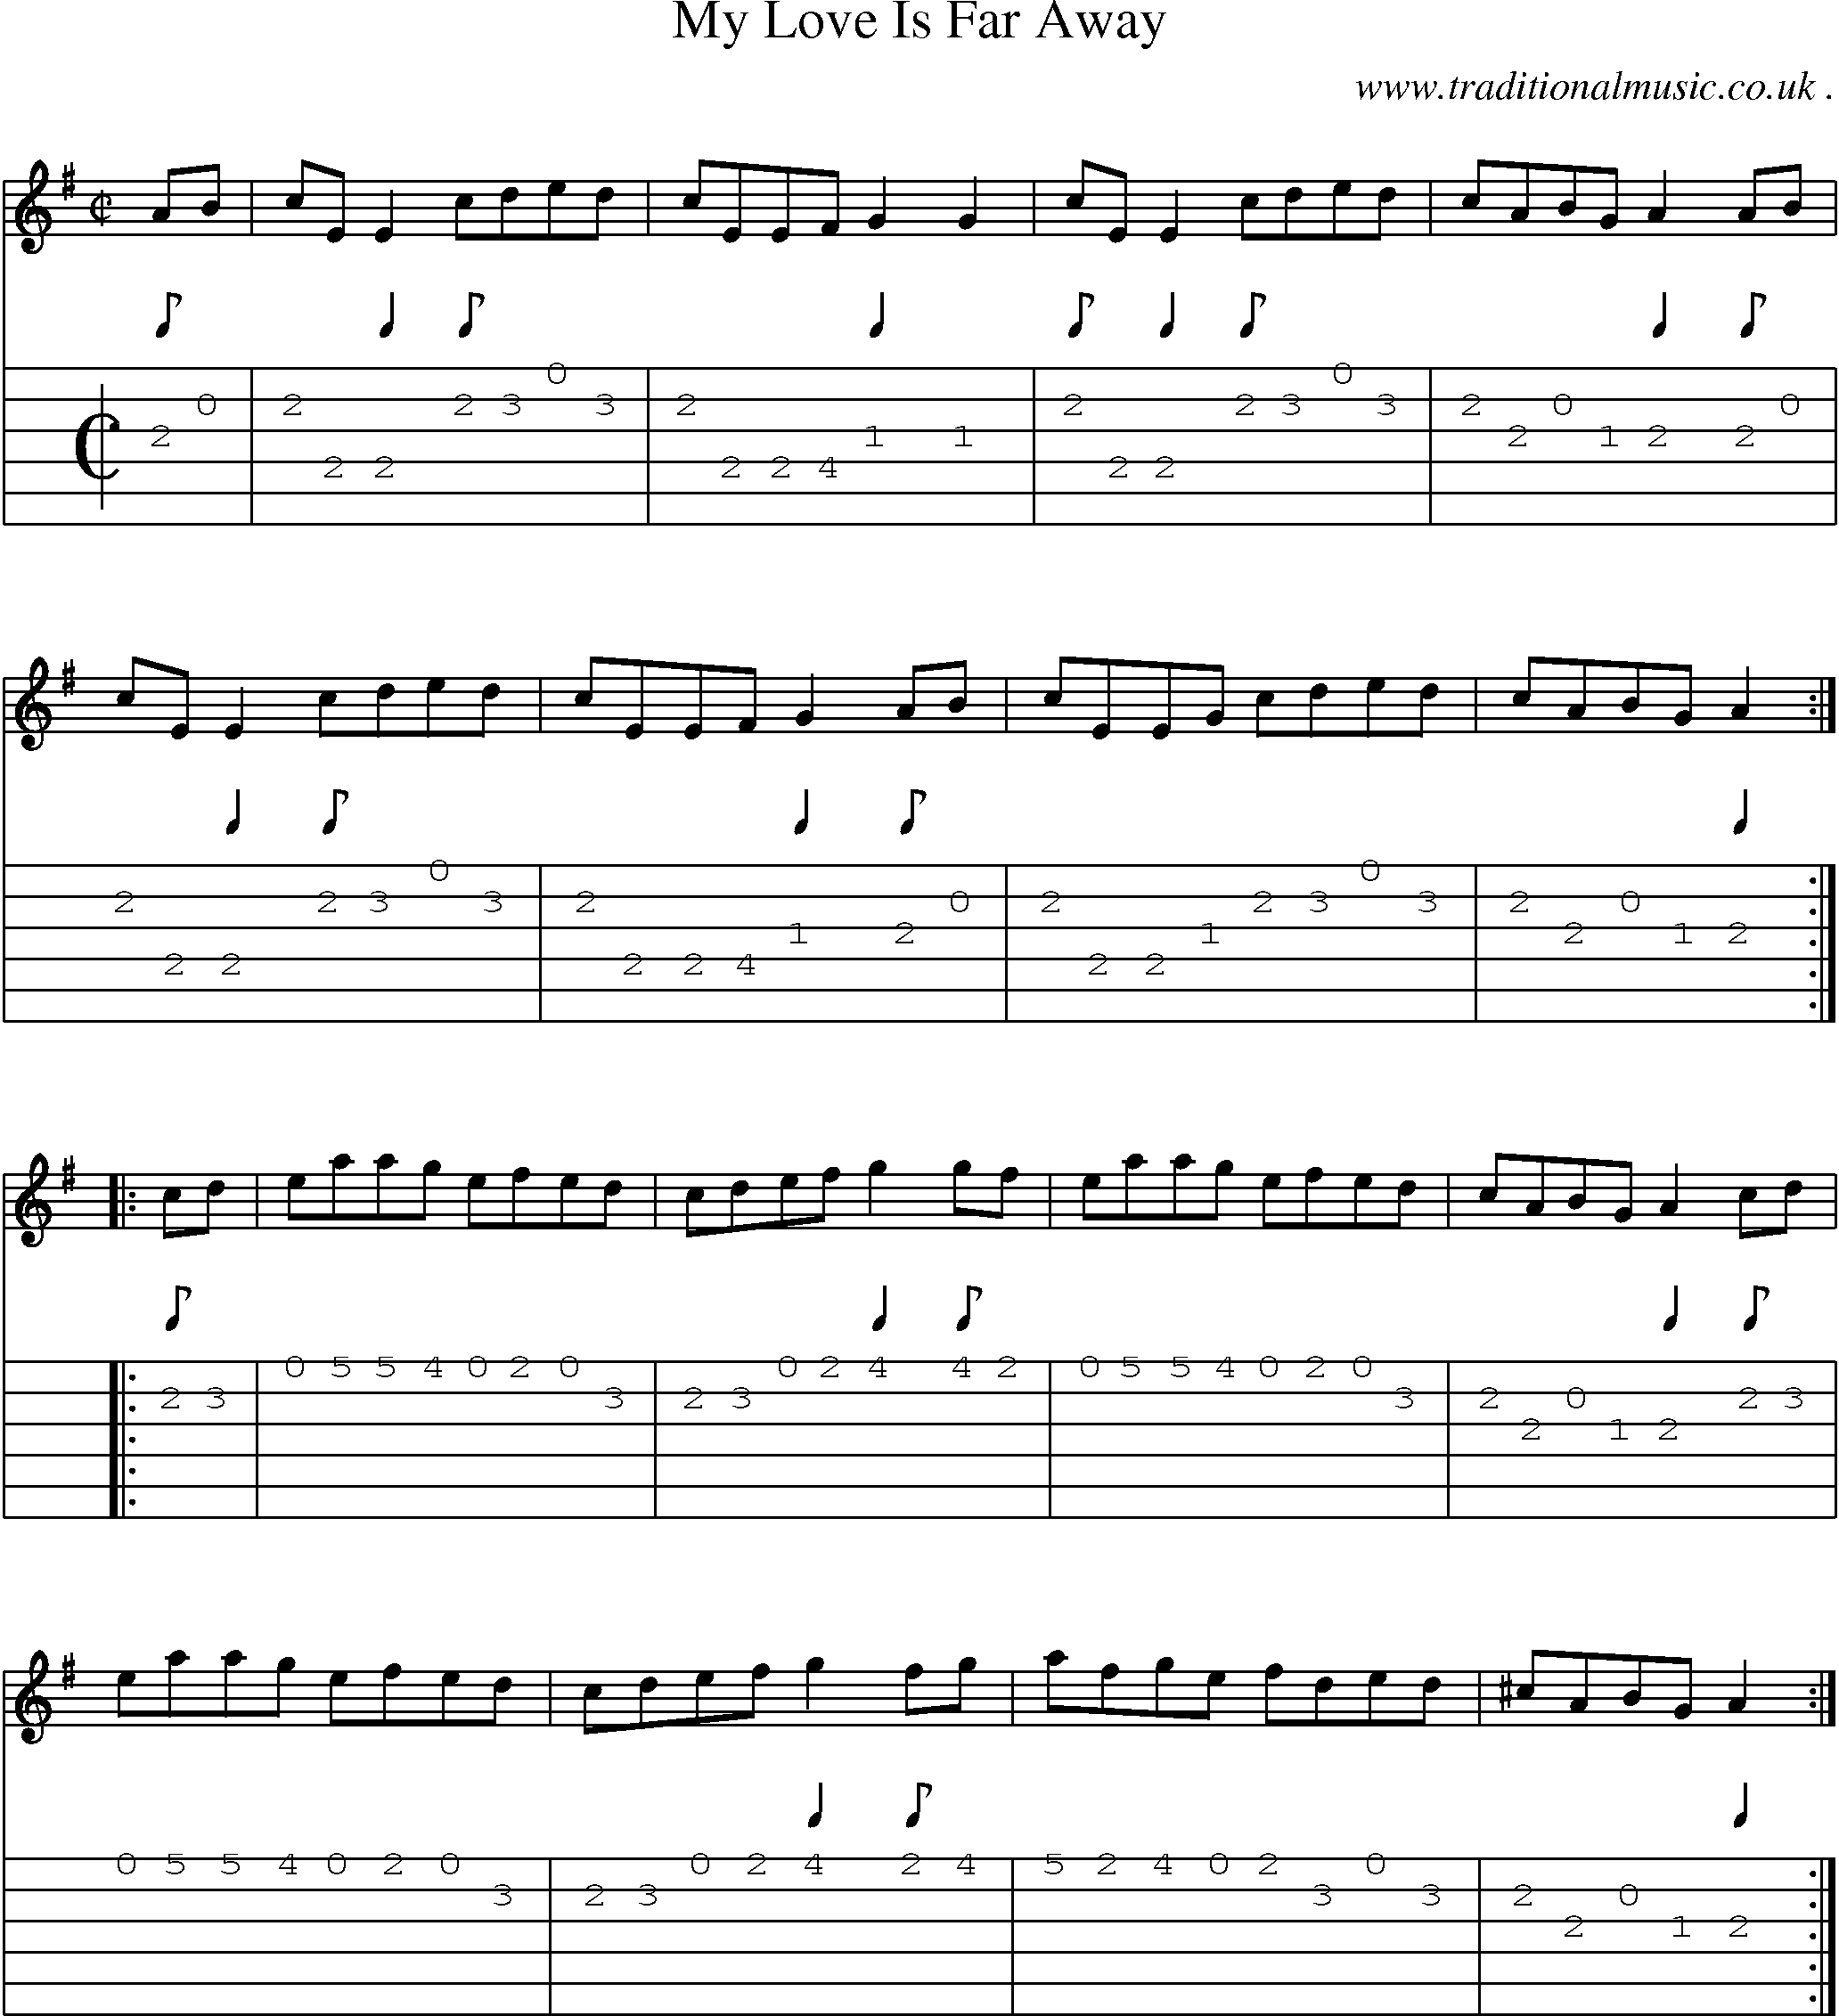 Sheet-Music and Guitar Tabs for My Love Is Far Away